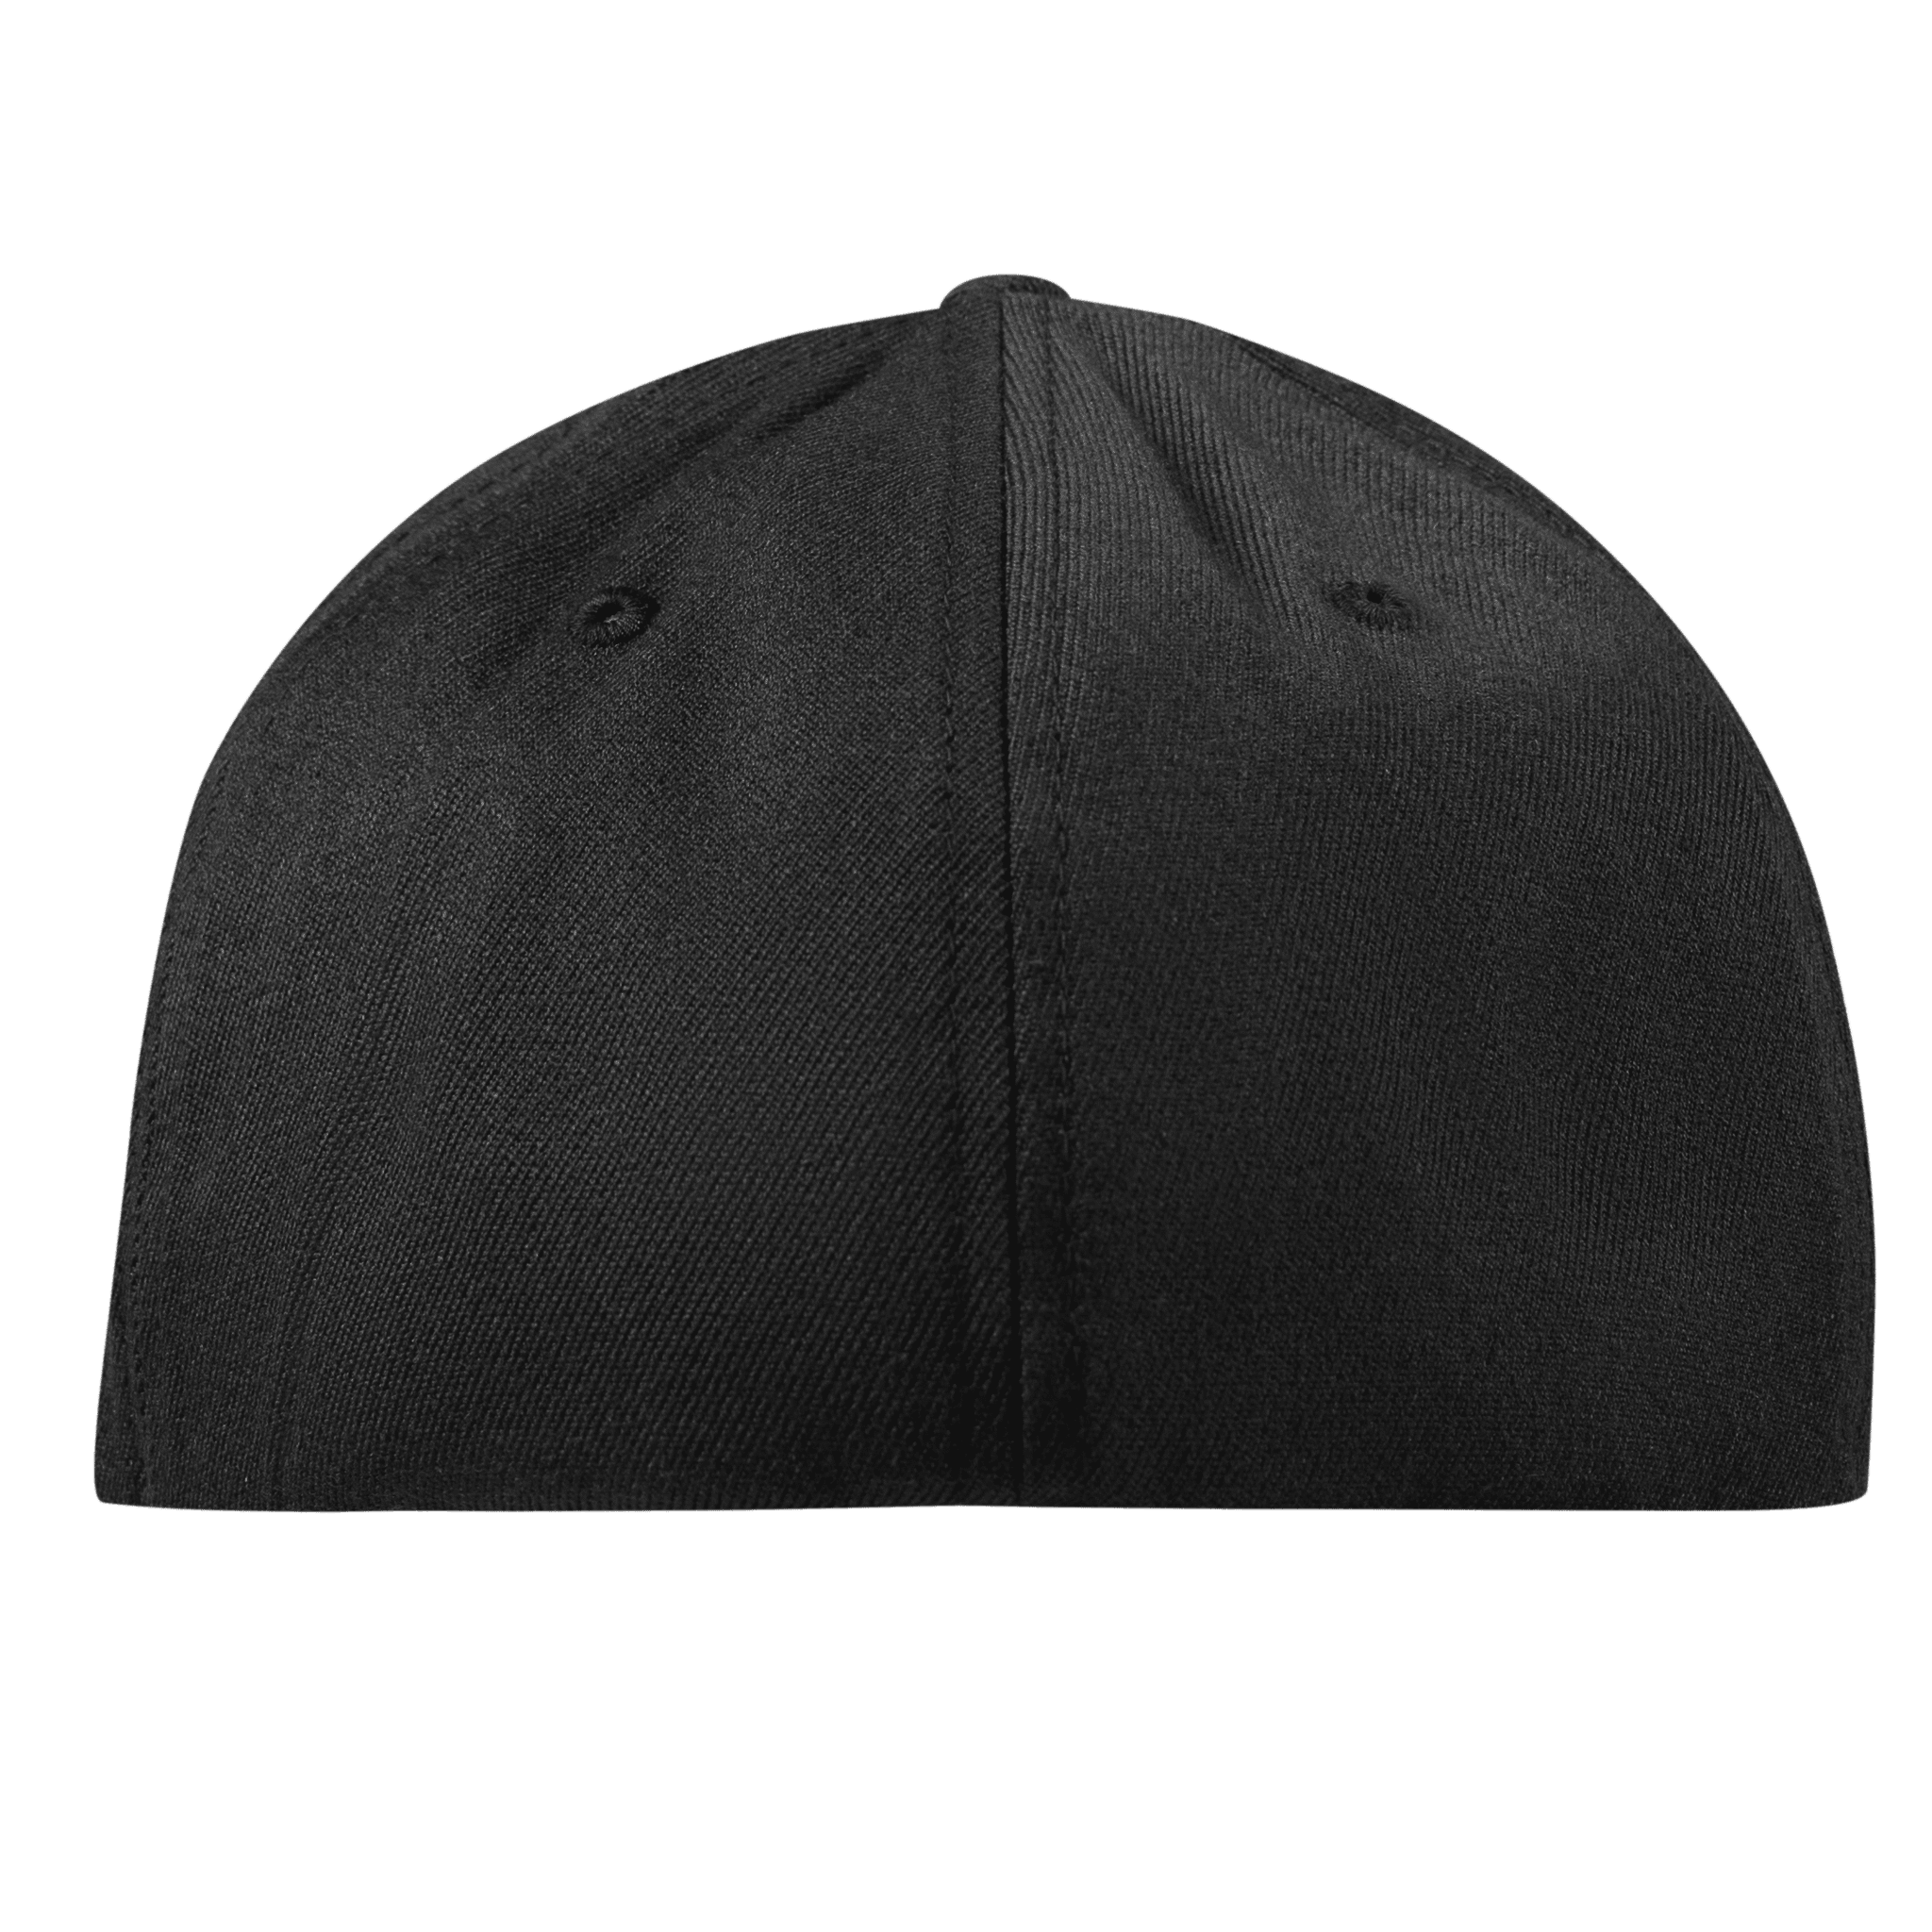 Wisconsin 30 Midnight Flexfit Fitted Back Black